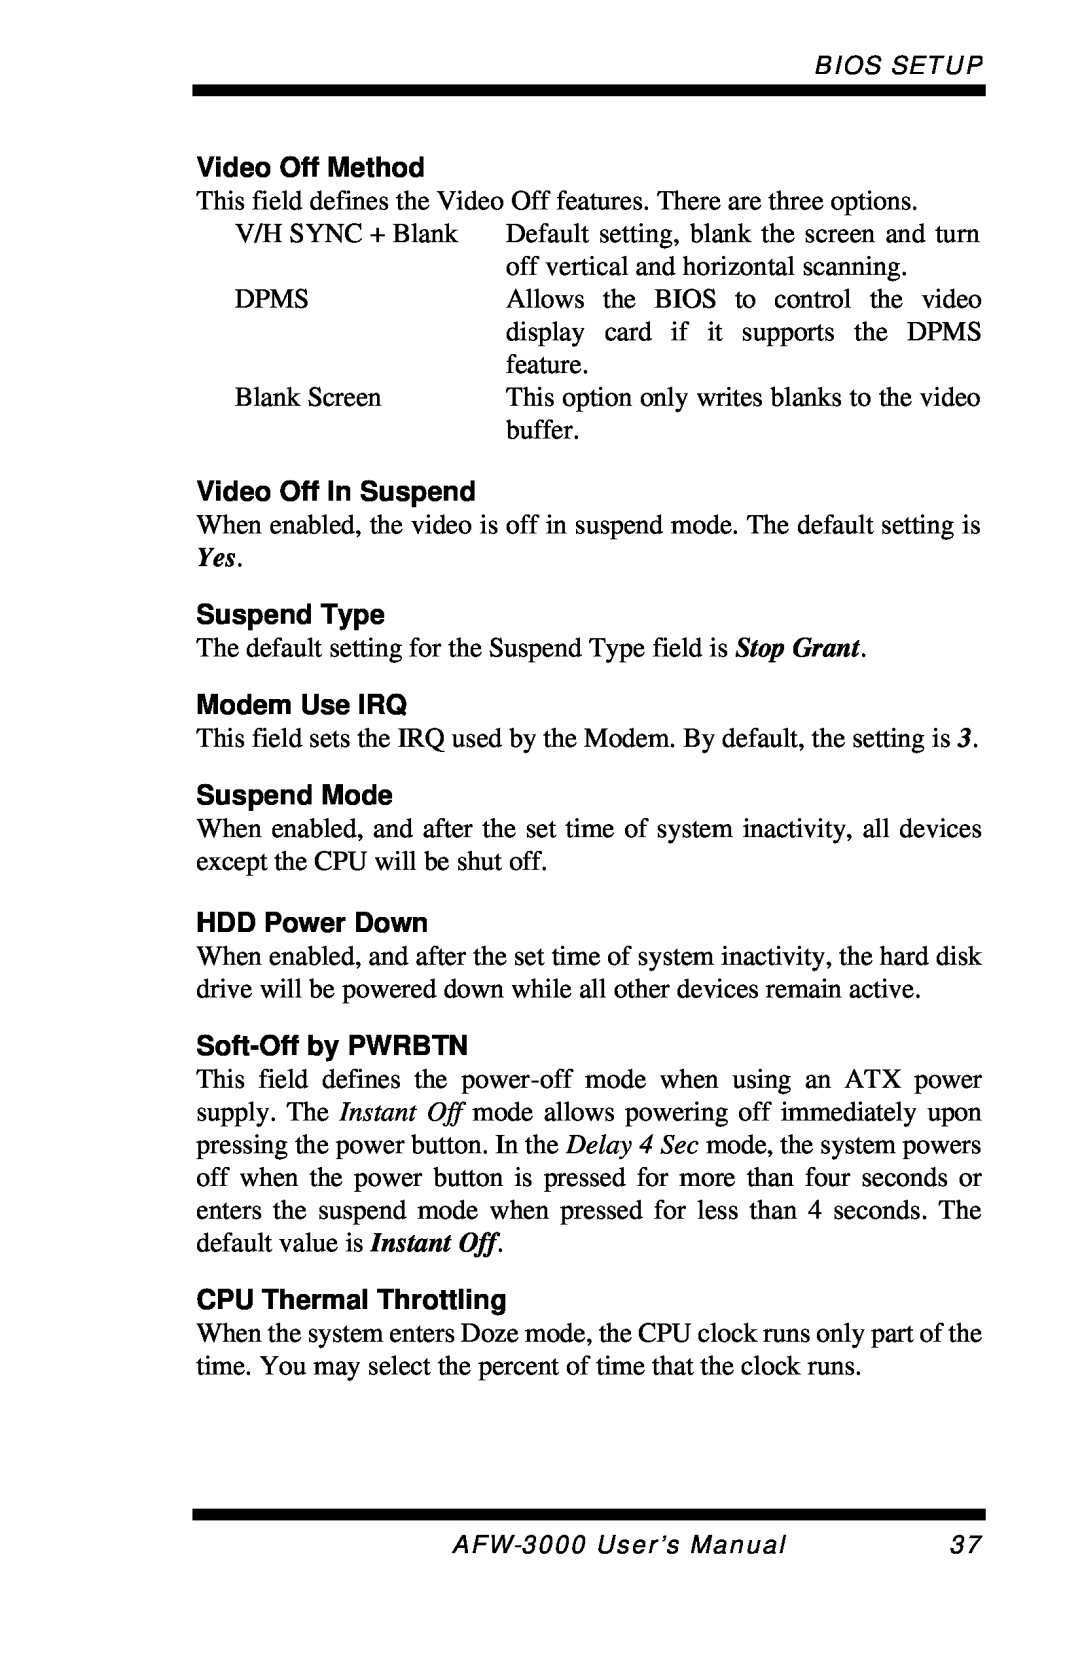 Intel E7501 user manual Video Off Method, Video Off In Suspend, Suspend Type, Modem Use IRQ, Suspend Mode, HDD Power Down 